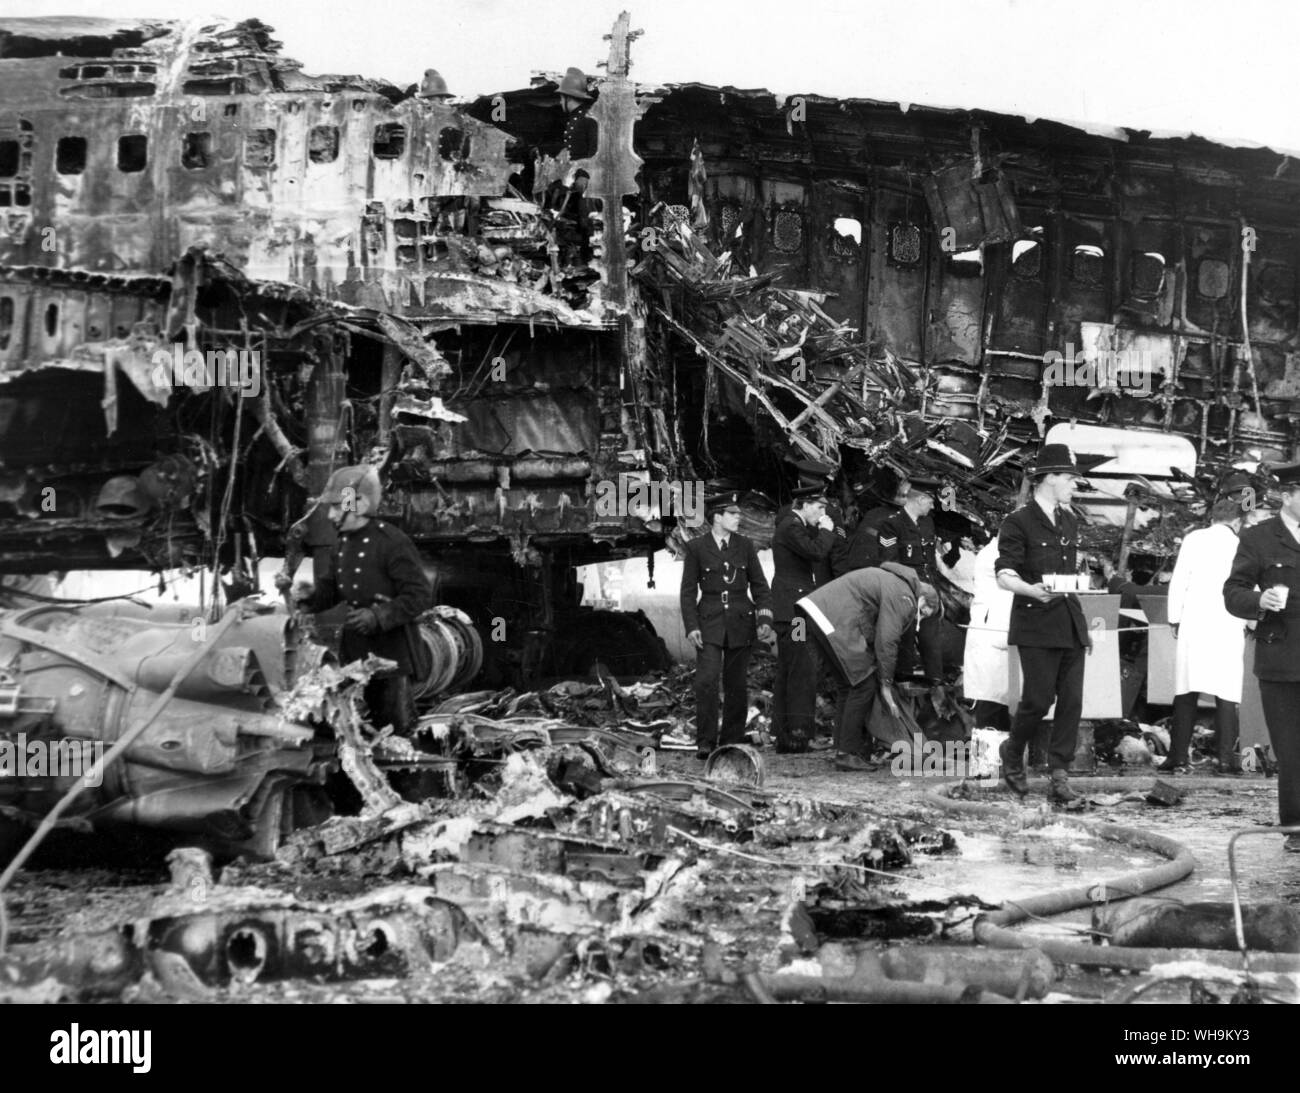 1968: Boeing 707 crash at London airport. Police and firemen search the wreckage. Stock Photo